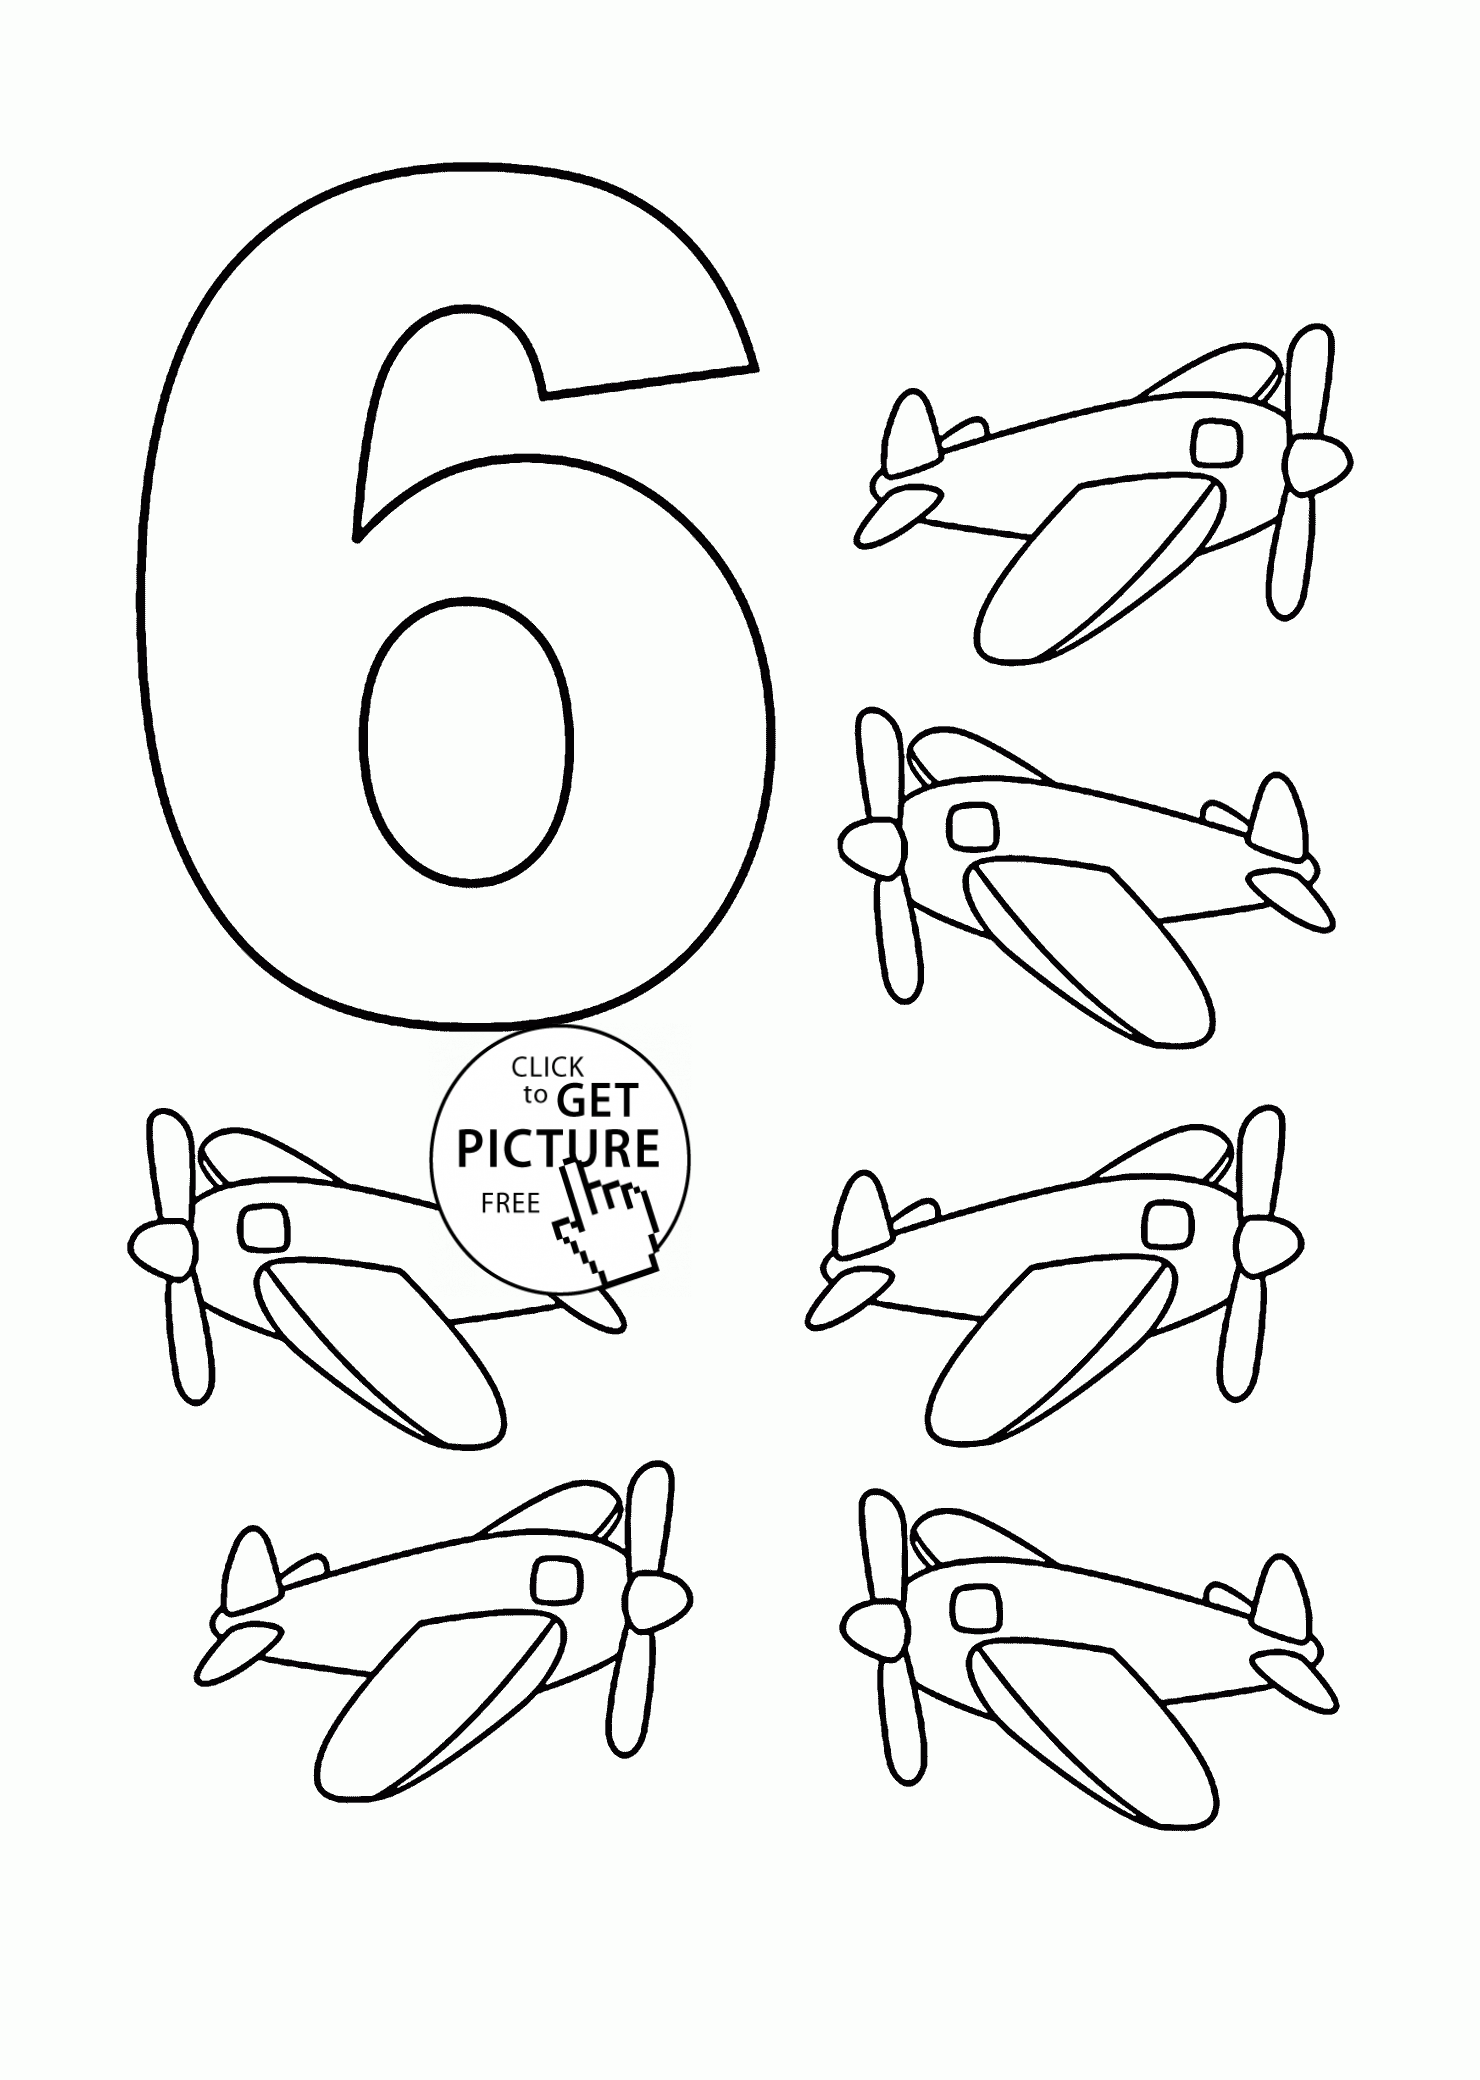 number 6 coloring pages number 6 coloring page getcoloringpagescom number 6 pages coloring 